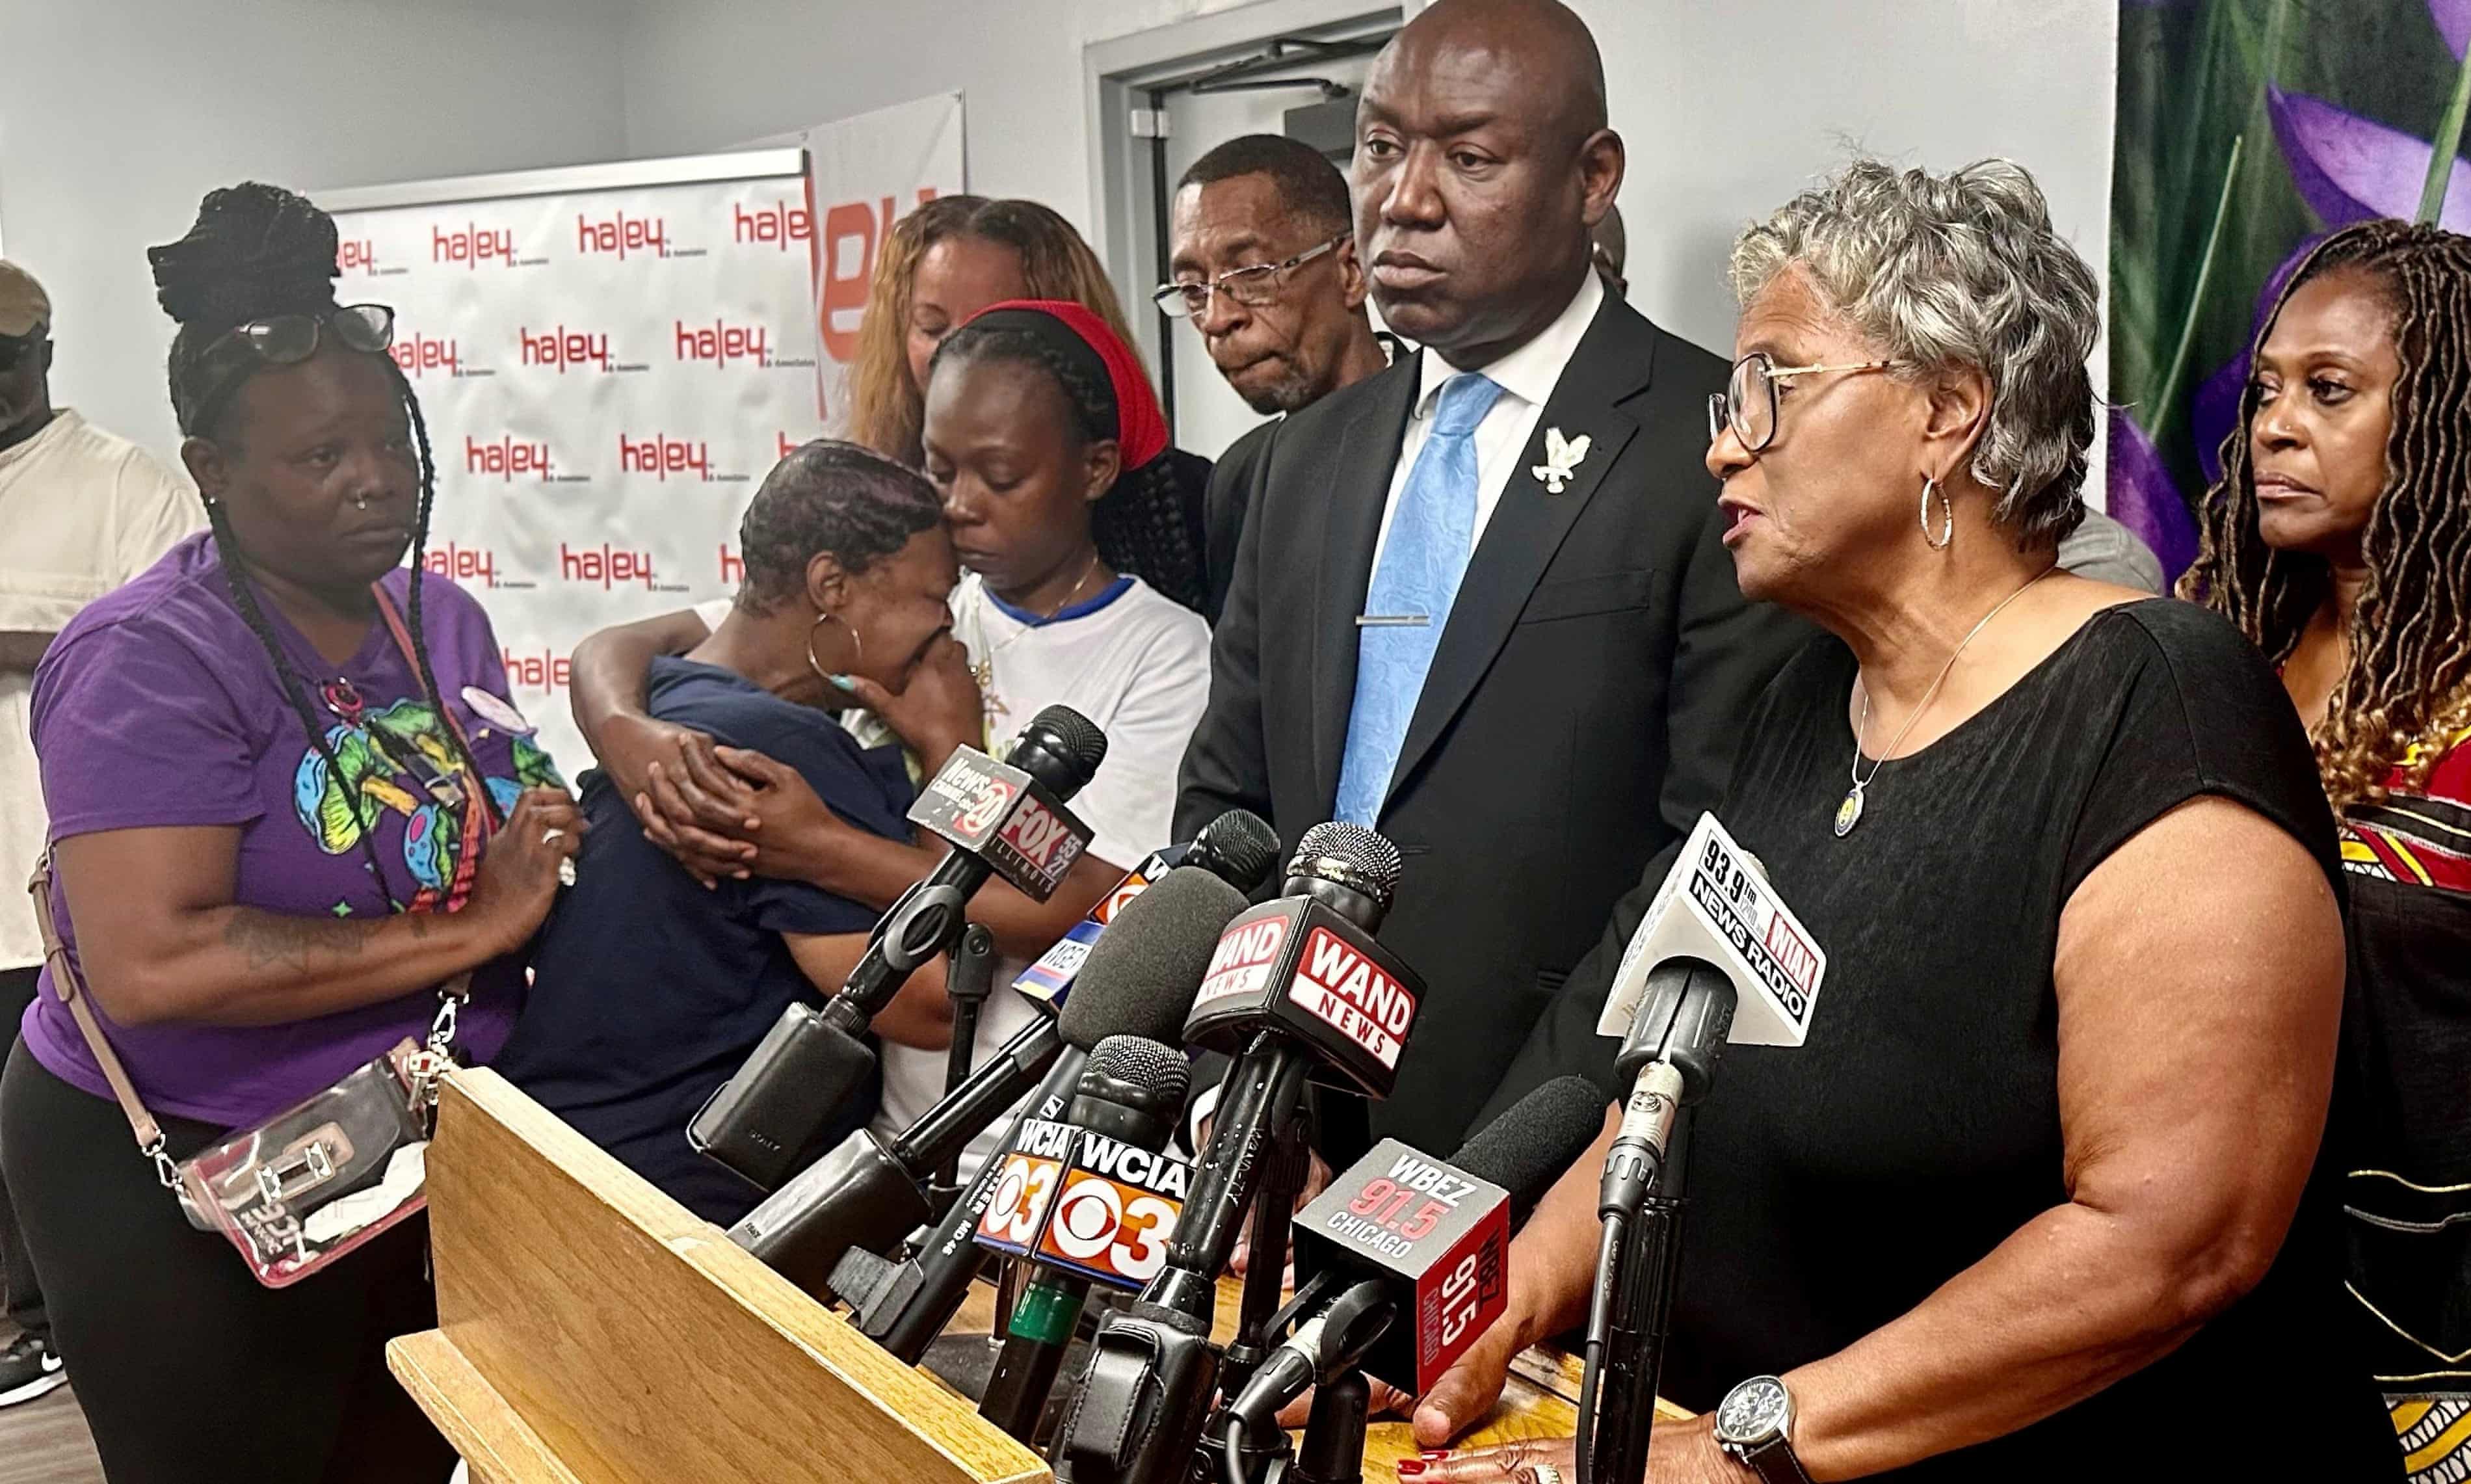 Biden calls for justice after footage released of police killing Black woman (theguardian.com)